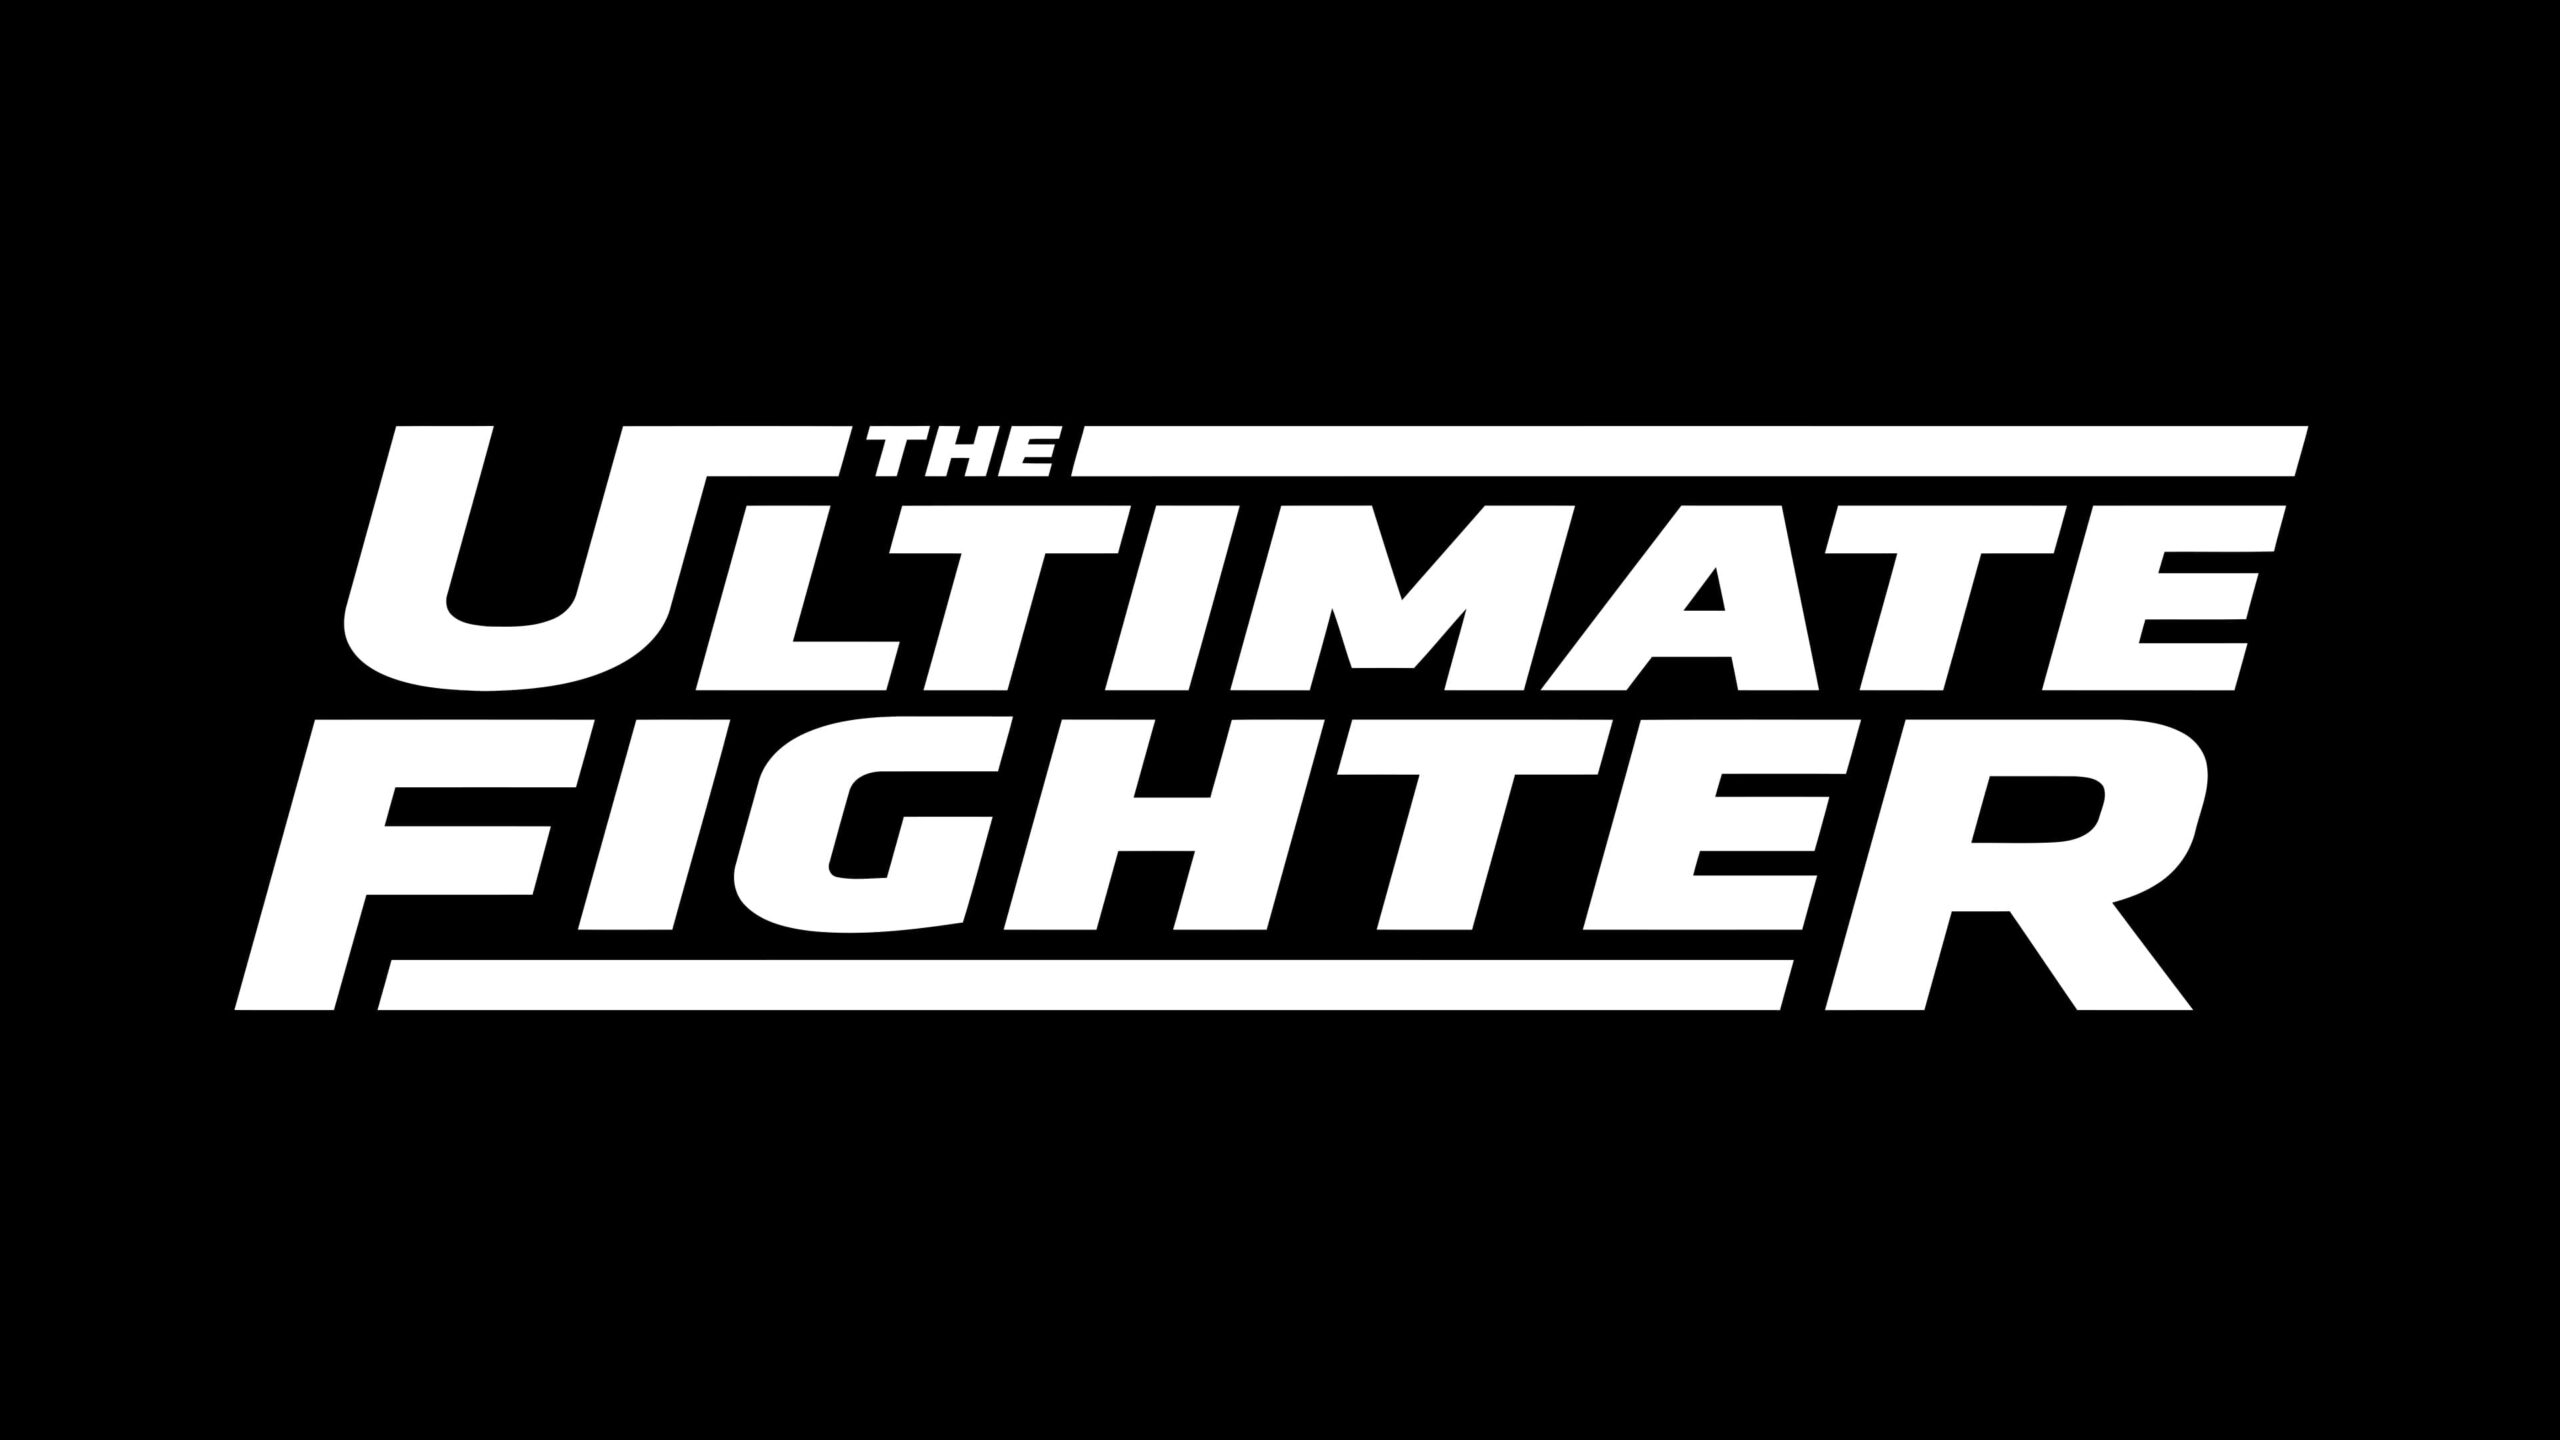 The Ultimate Fighter season 31